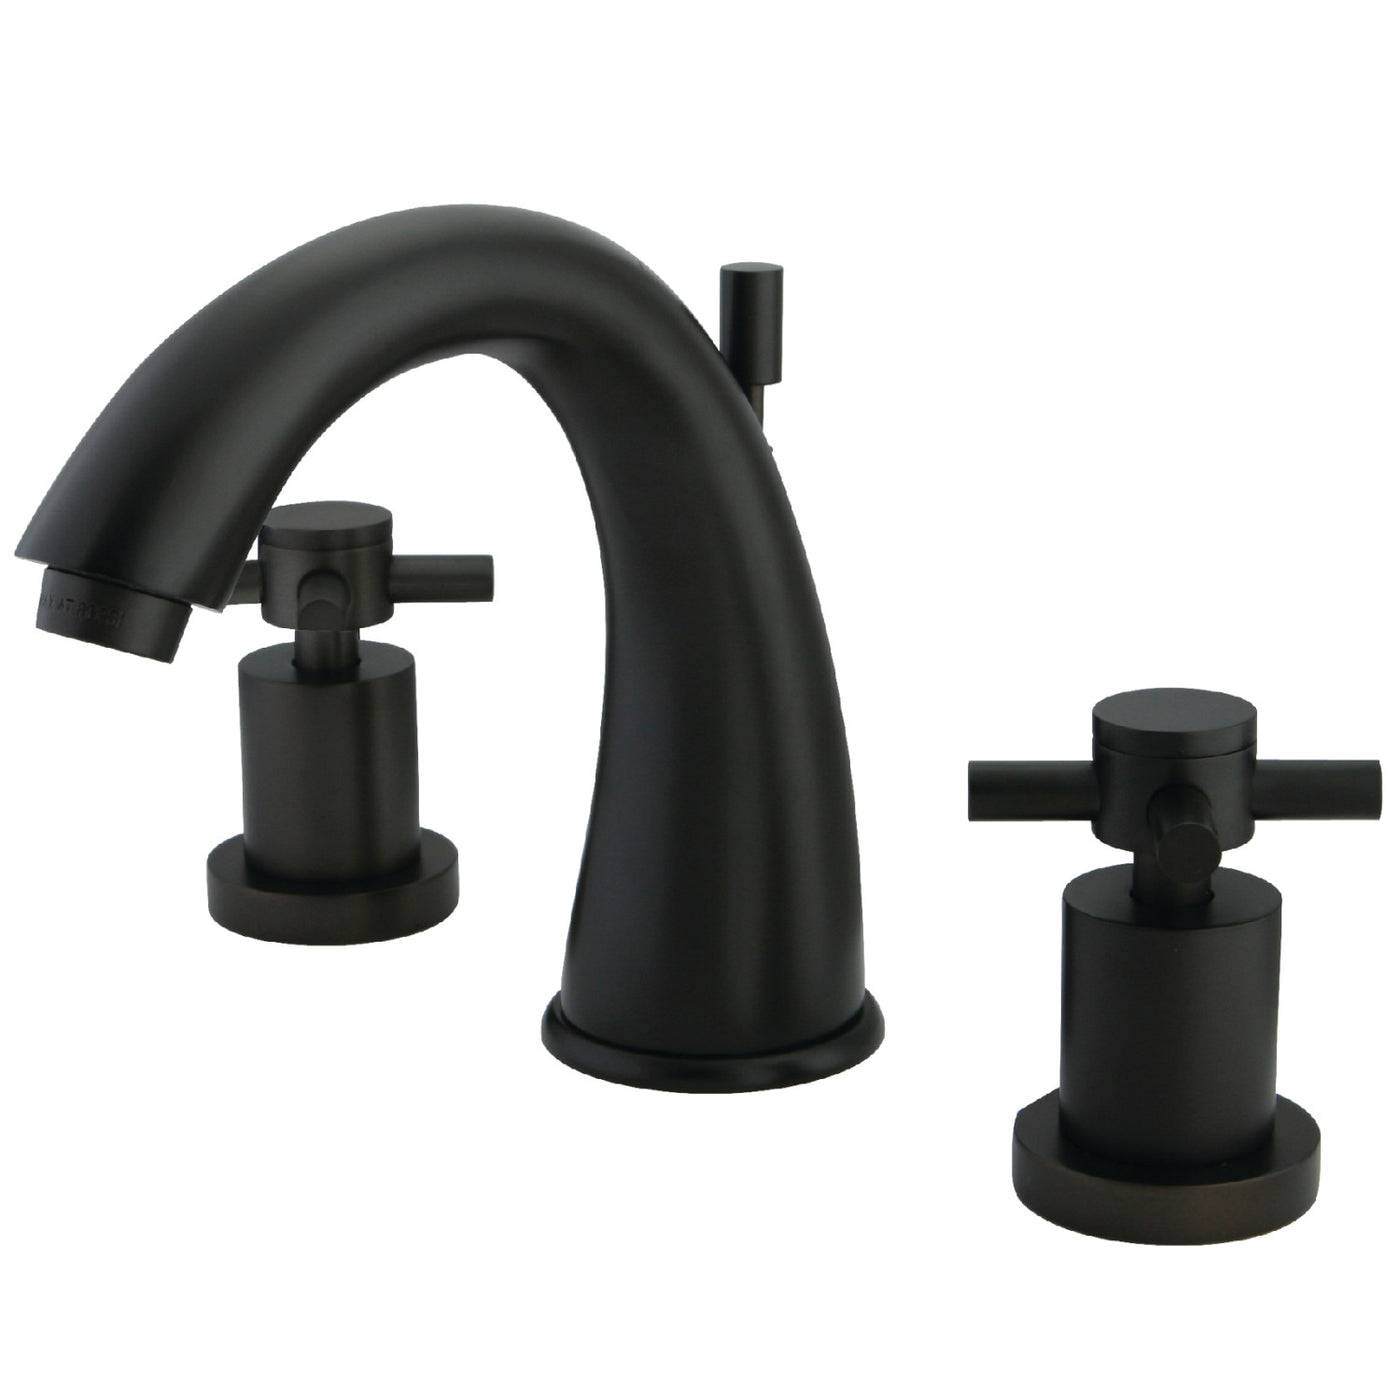 Elements of Design ES2965DX Widespread Bathroom Faucet with Brass Pop-Up, Oil Rubbed Bronze